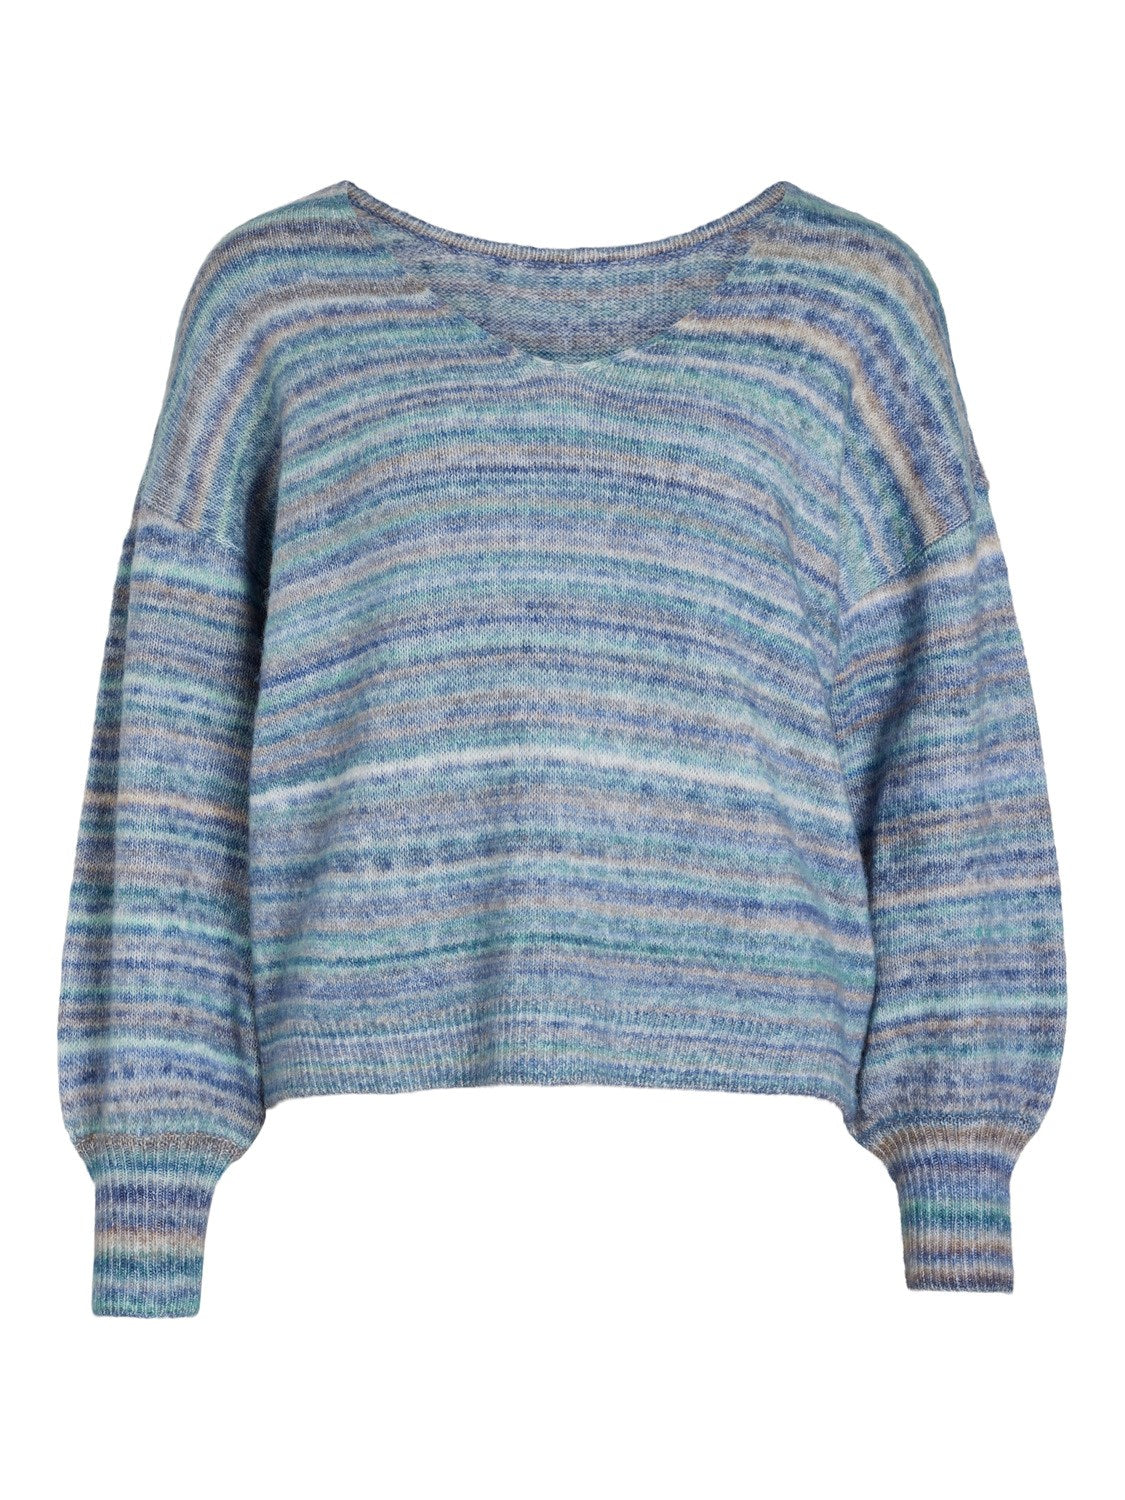 Gonia Knit / Moroccan Blue